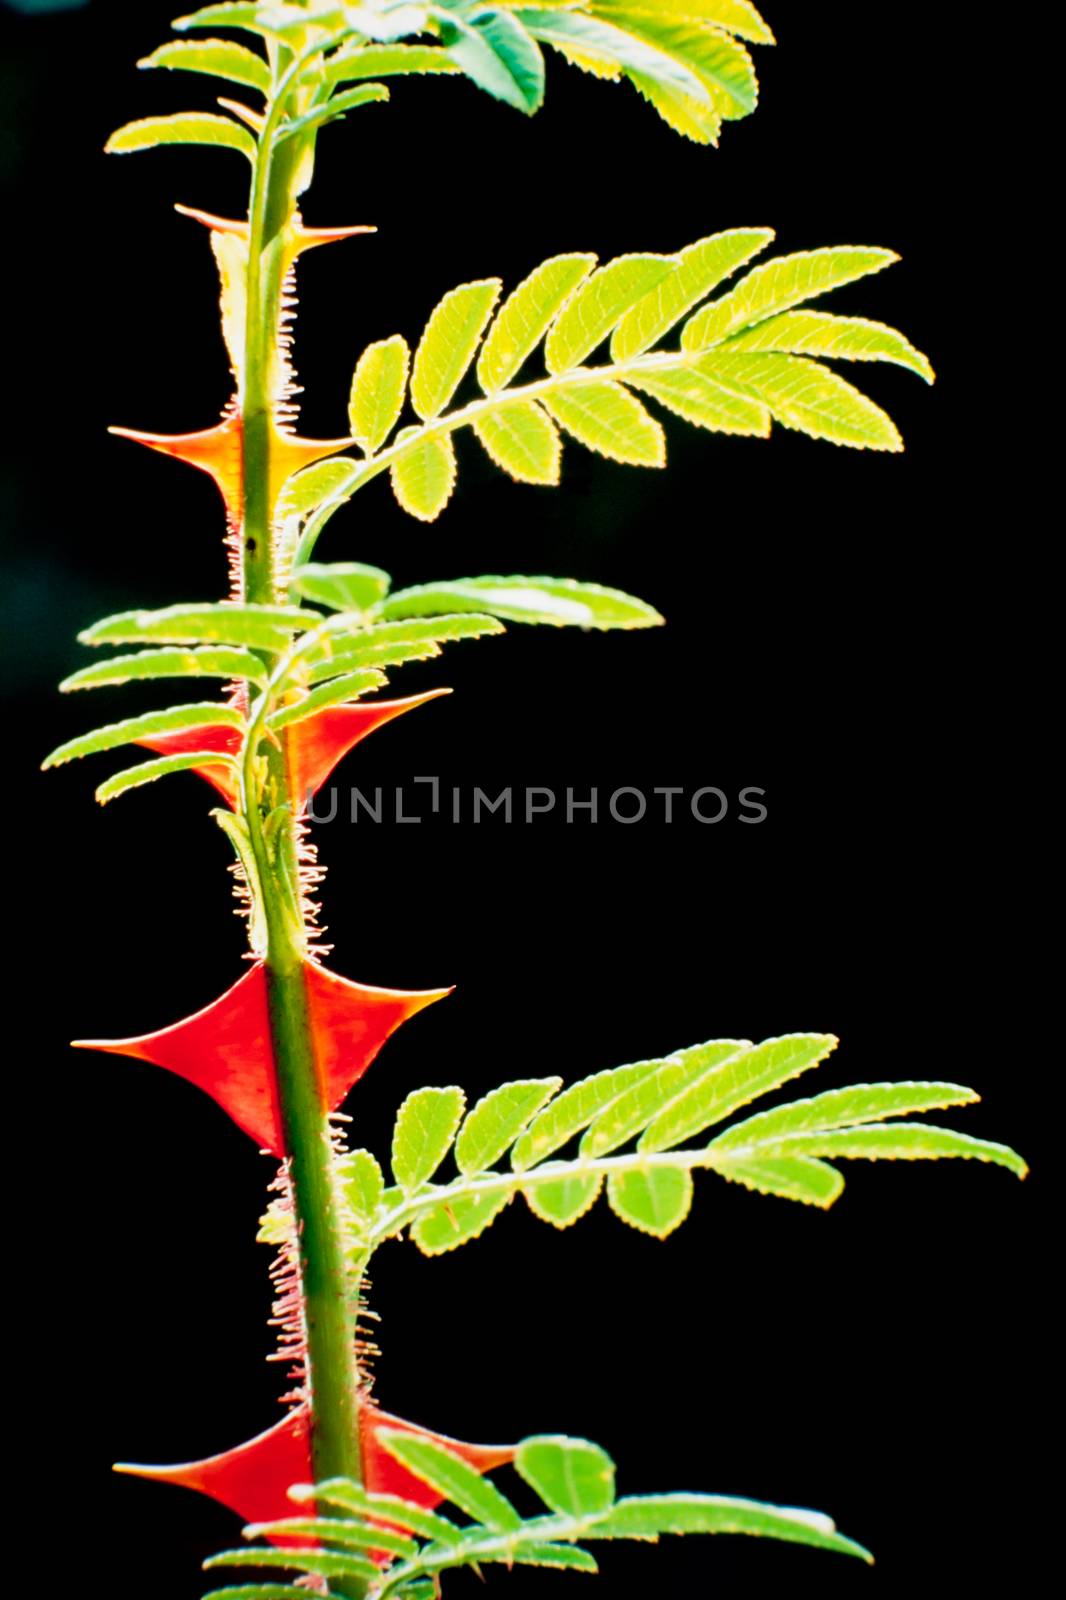 Macro detail of beautiful thorny rose stem covered in hairs with fresh green leaves backlit on a black background